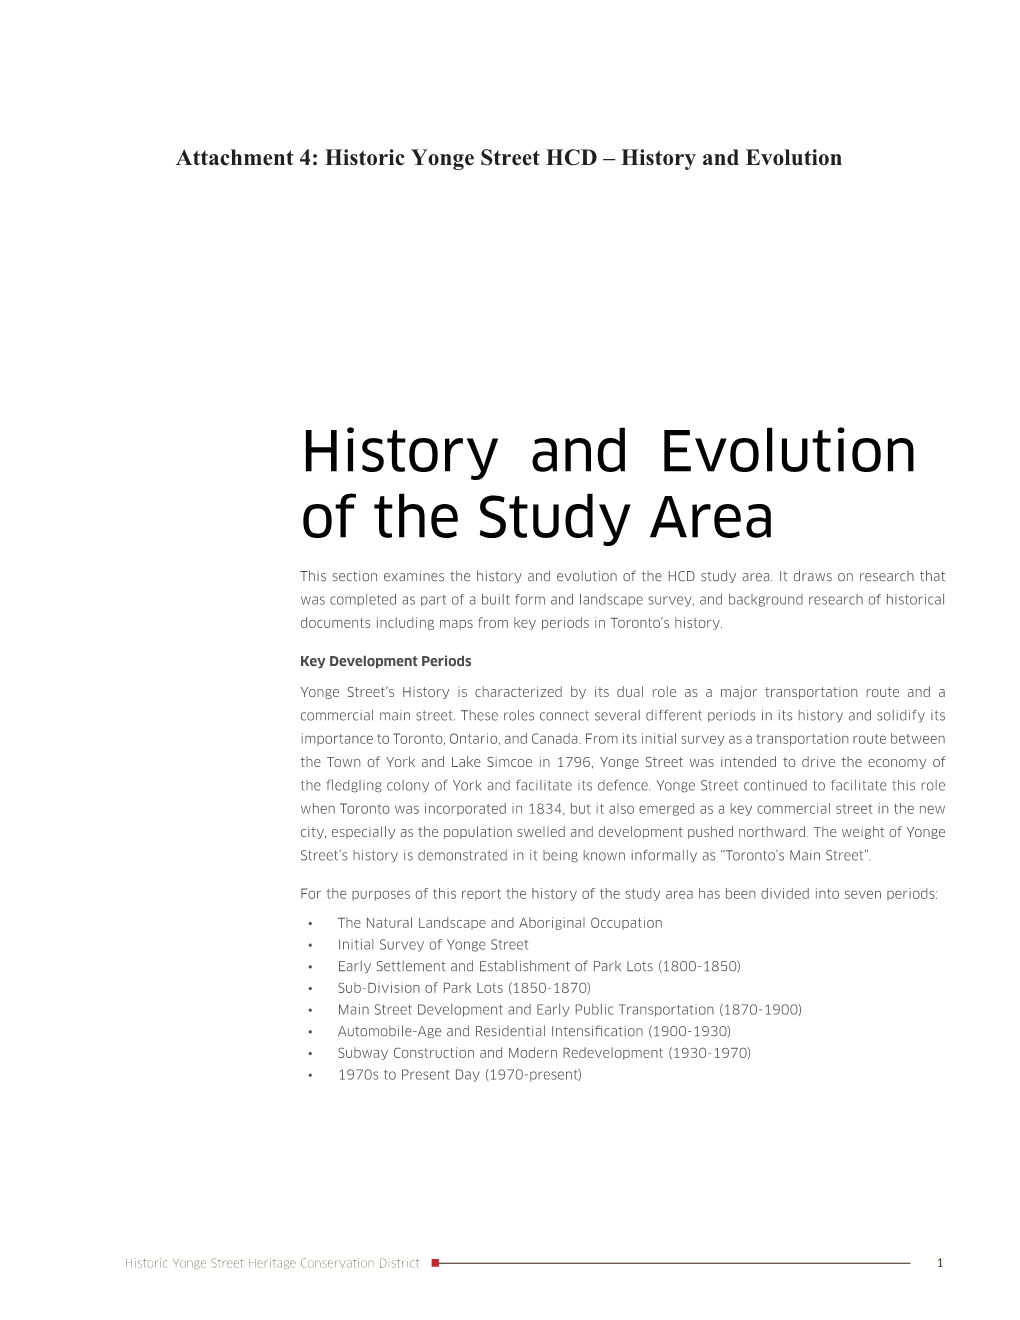 History and Evolution of the Study Area